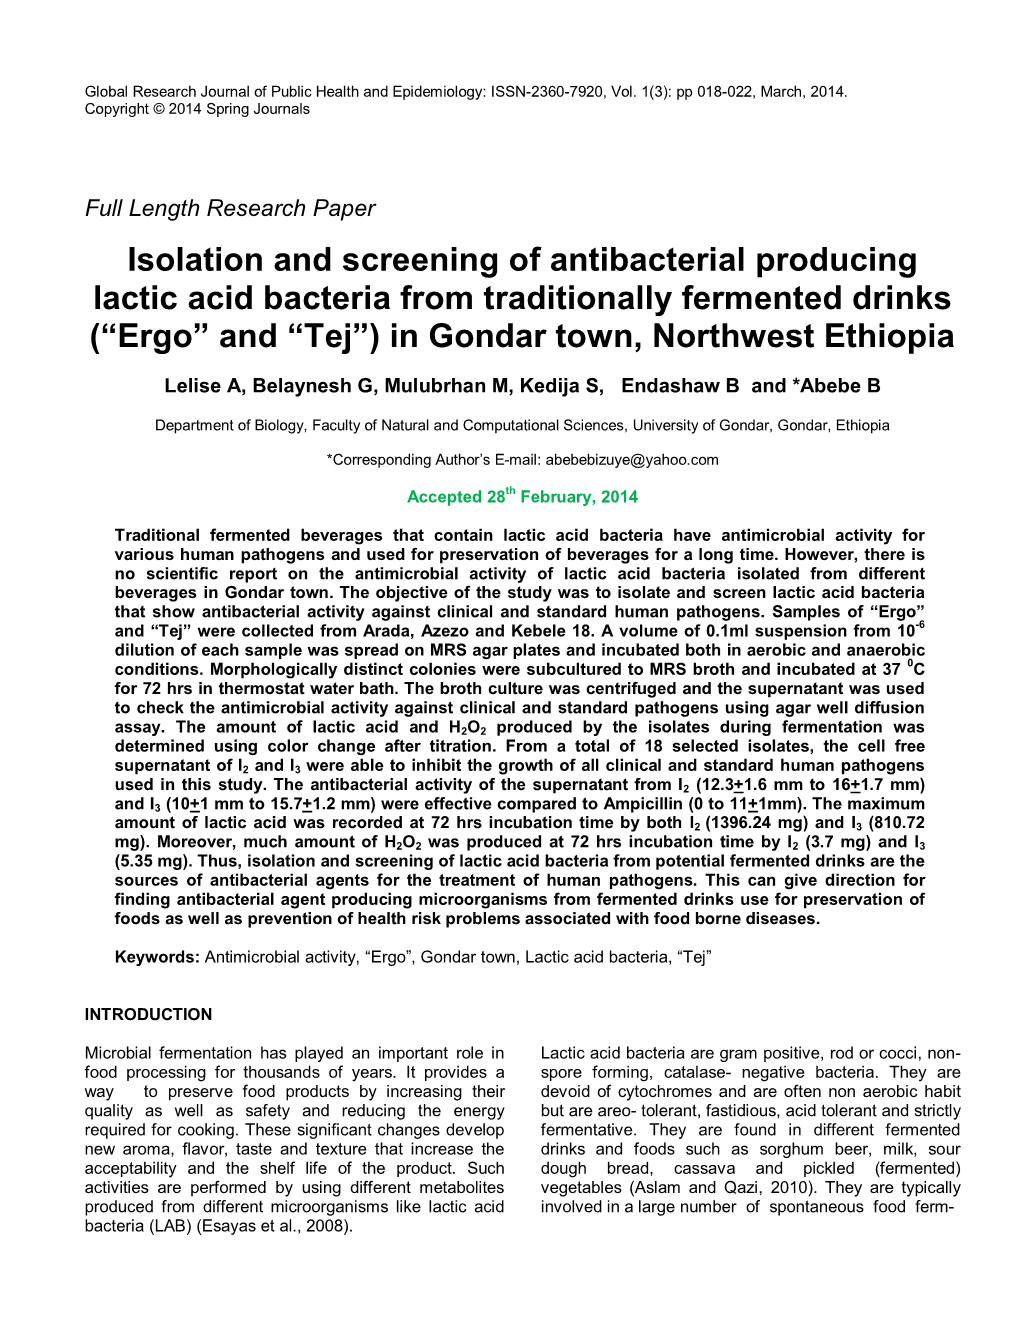 Isolation and Screening of Antibacterial Producing Lactic Acid Bacteria from Traditionally Fermented Drinks (“Ergo” and “Tej”) in Gondar Town, Northwest Ethiopia